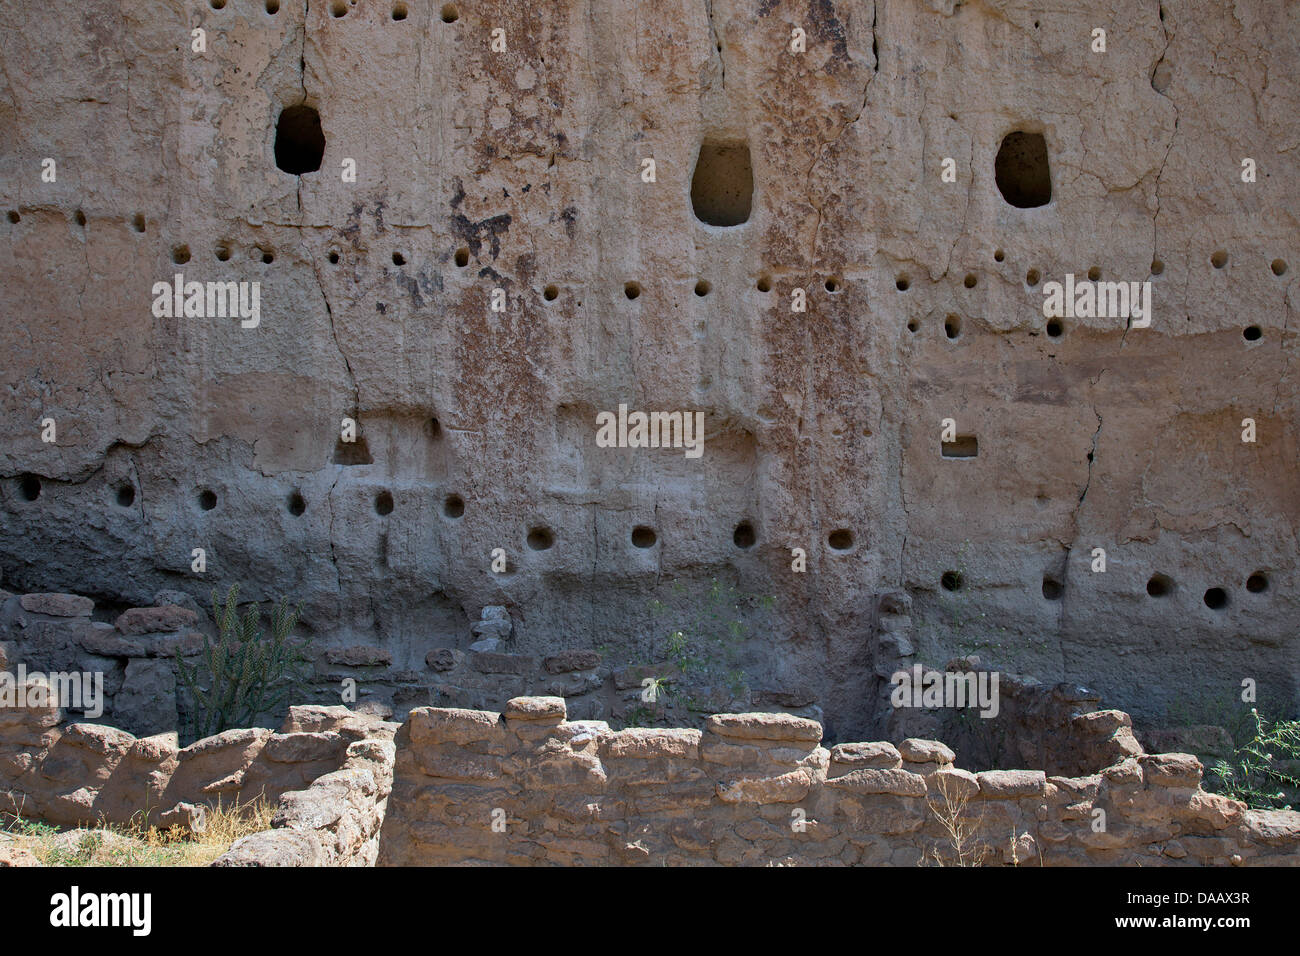 Detail of Long House, a prehistoric cliff dwelling in Frijoles Canyon in Bandelier National Monument, New Mexico. Stock Photo